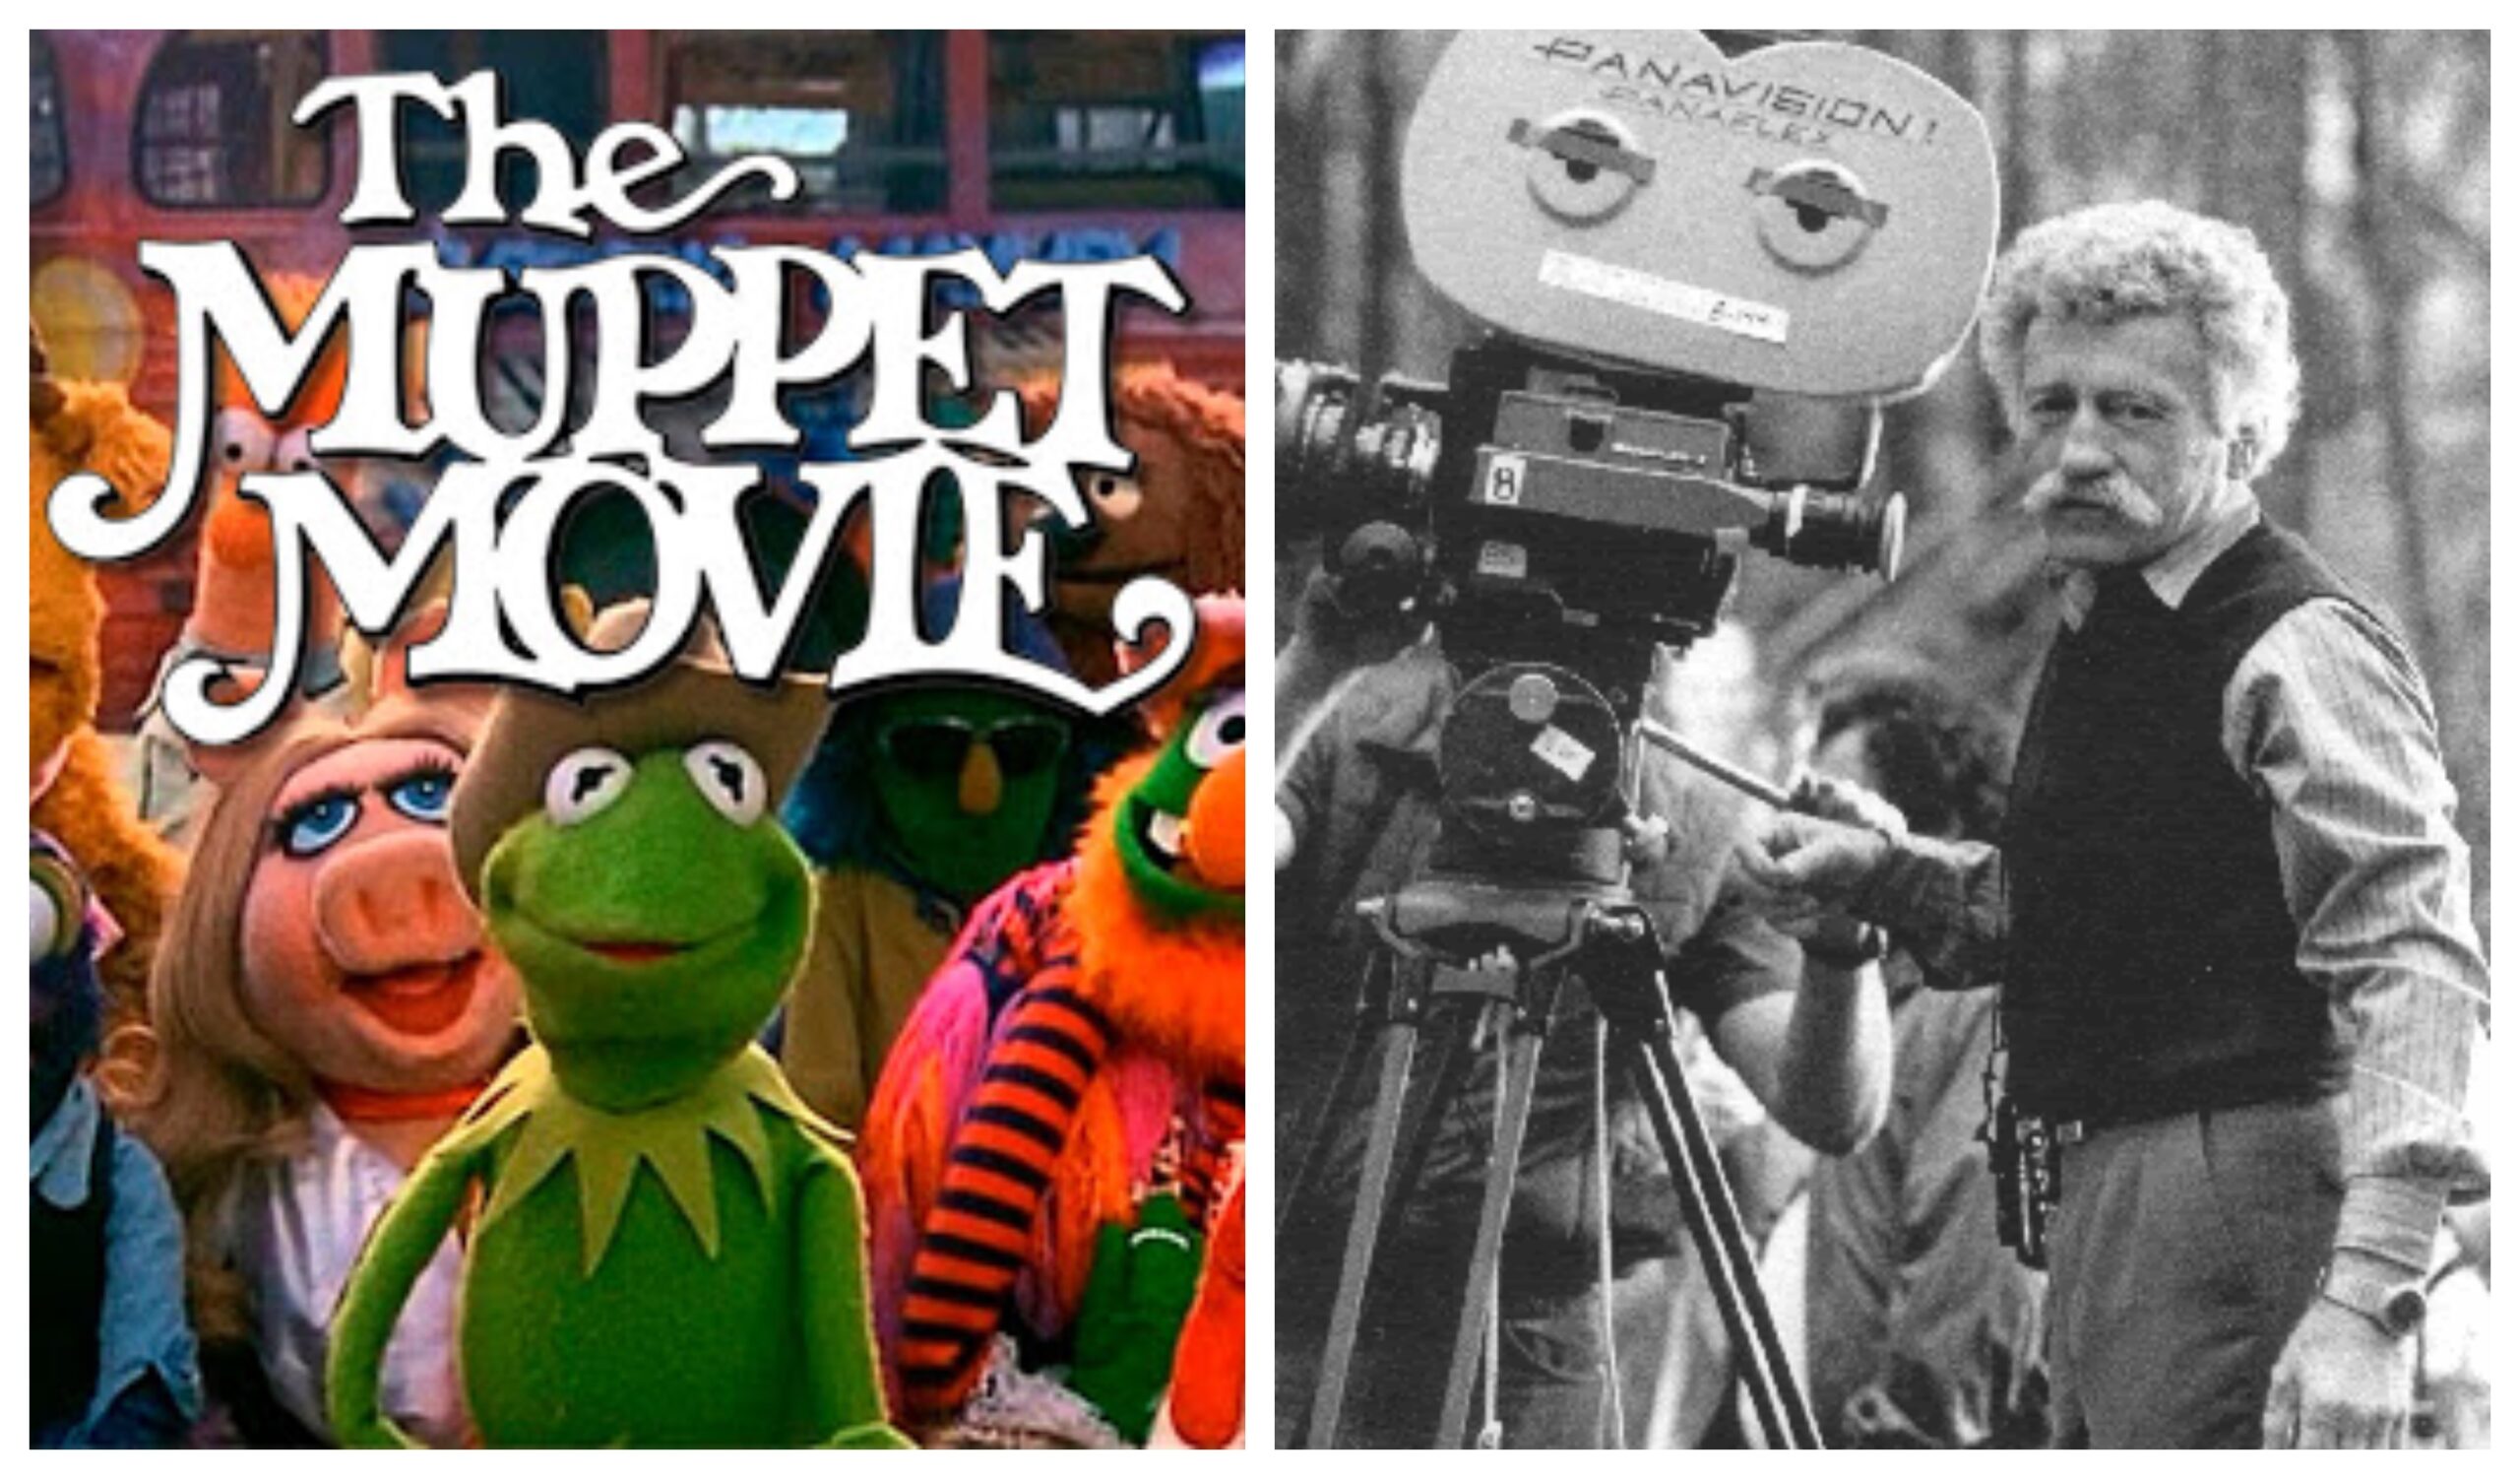 The Muppet Movie poster and Isidore Mankofsky